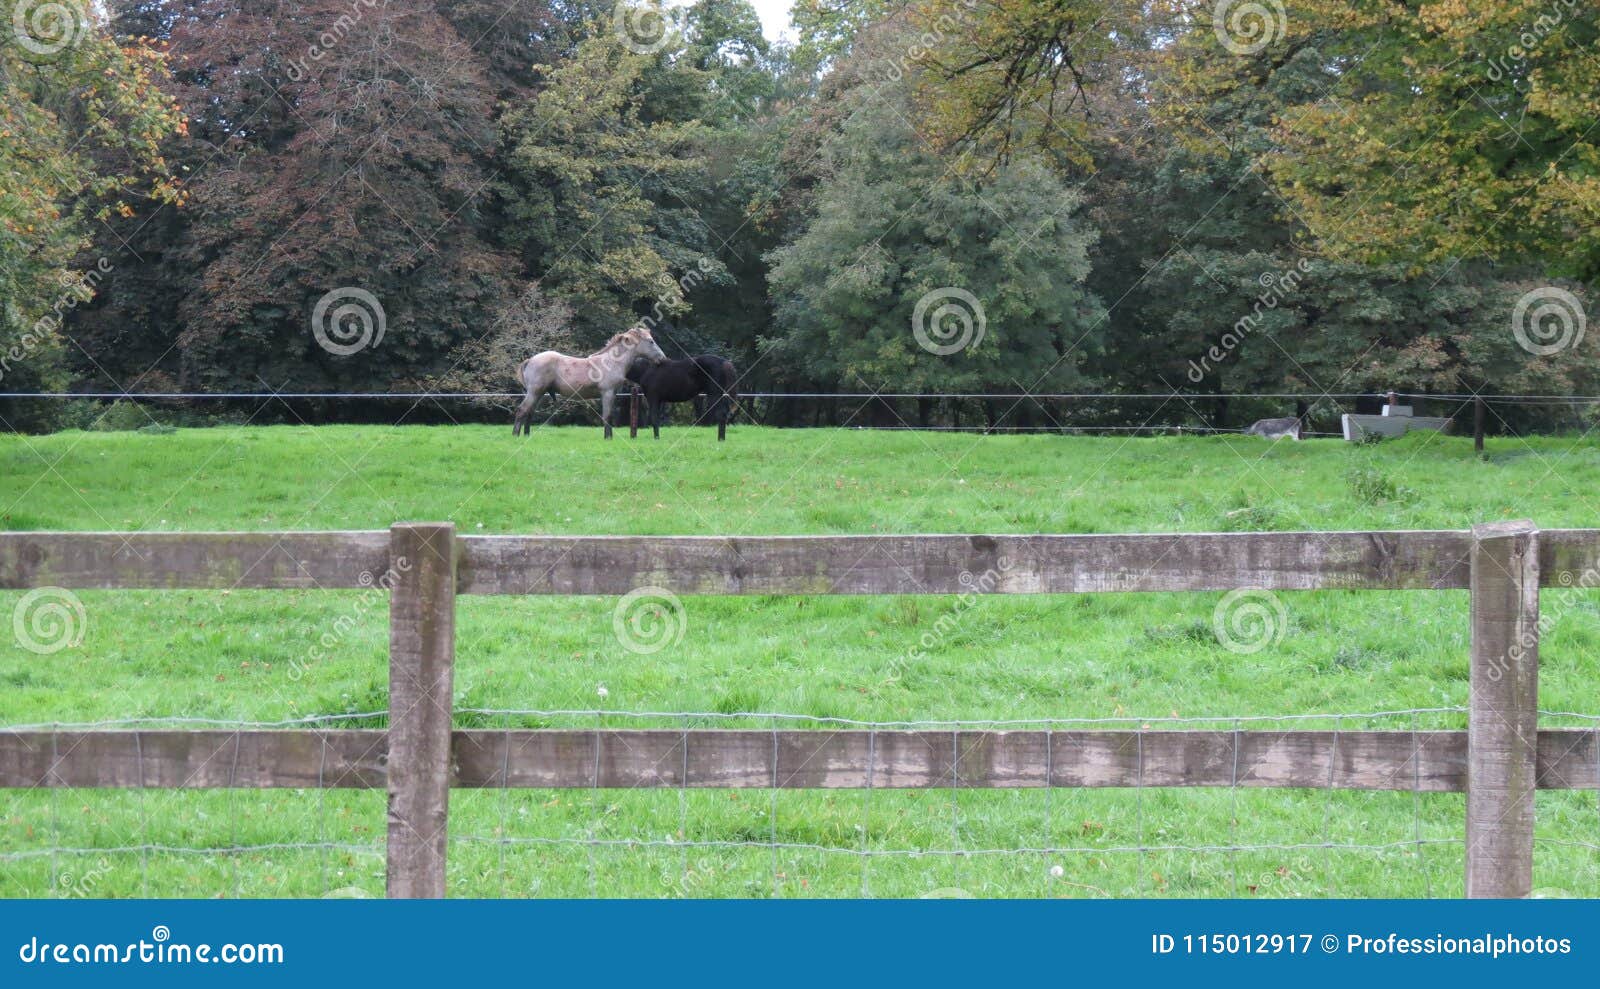 horses necking on a field of grass